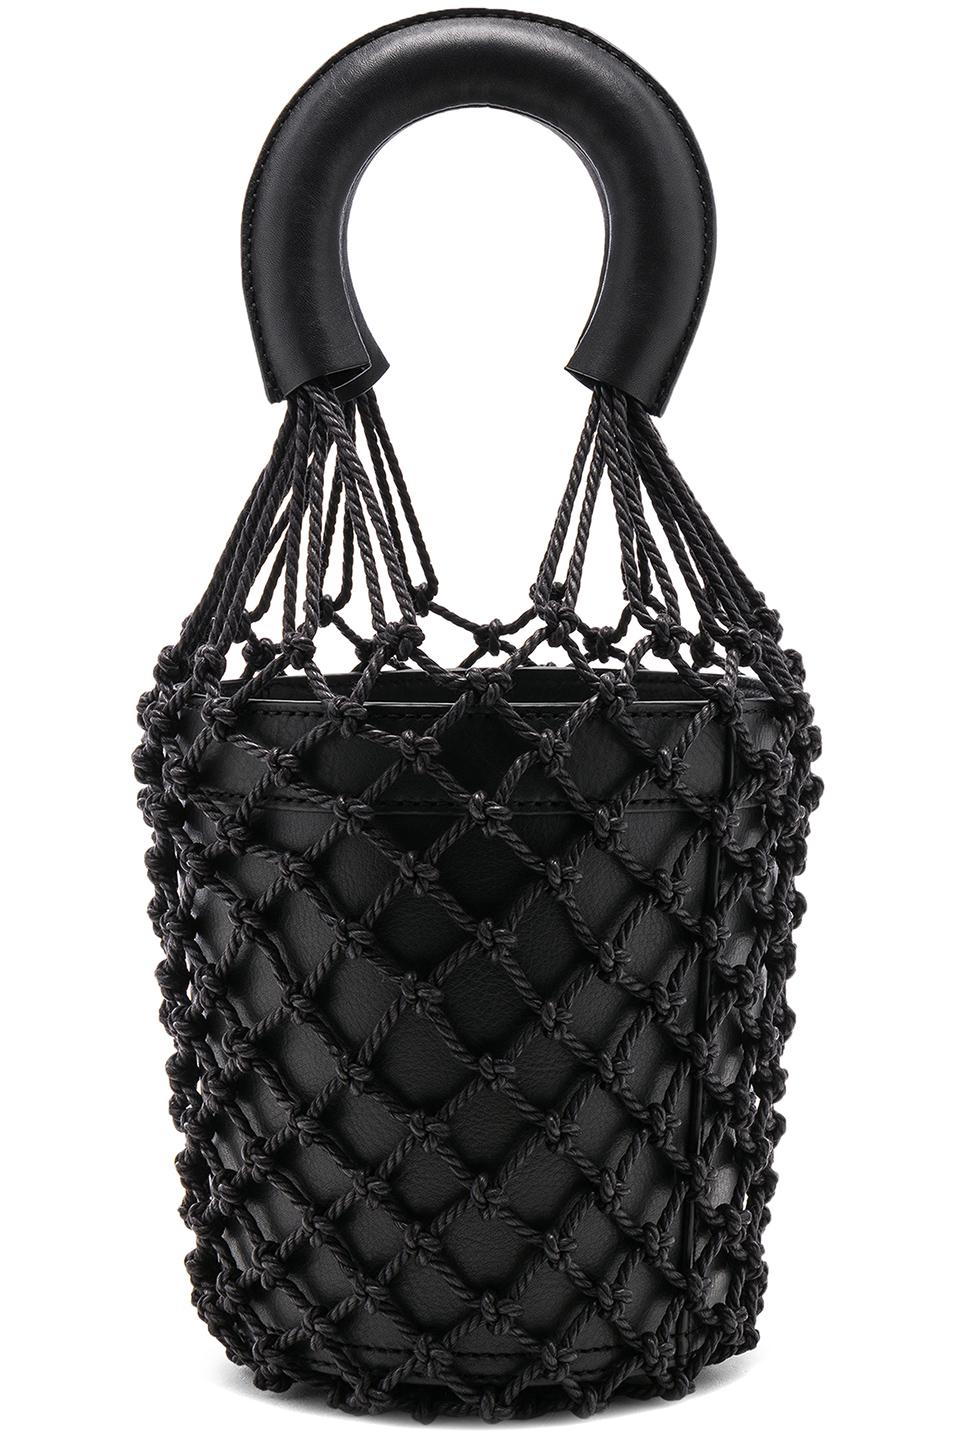 STAUD Leather Moreau Bucket Bag in Black - Save 77% - Lyst